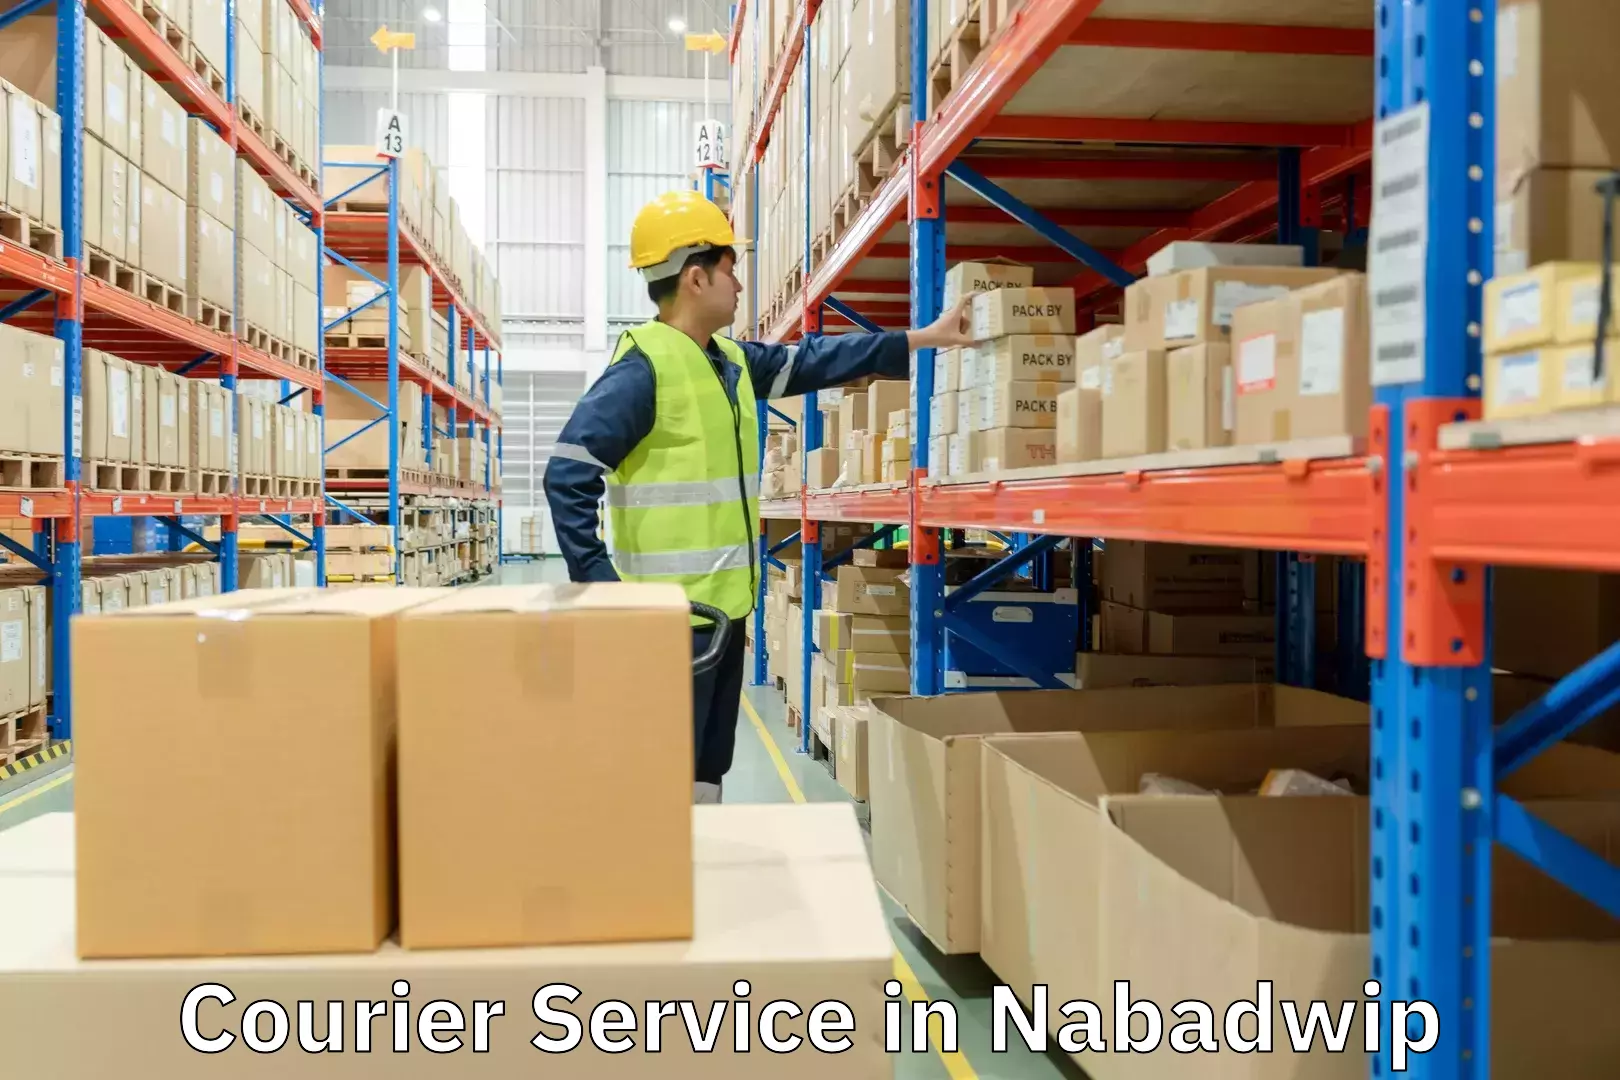 Reliable package handling in Nabadwip